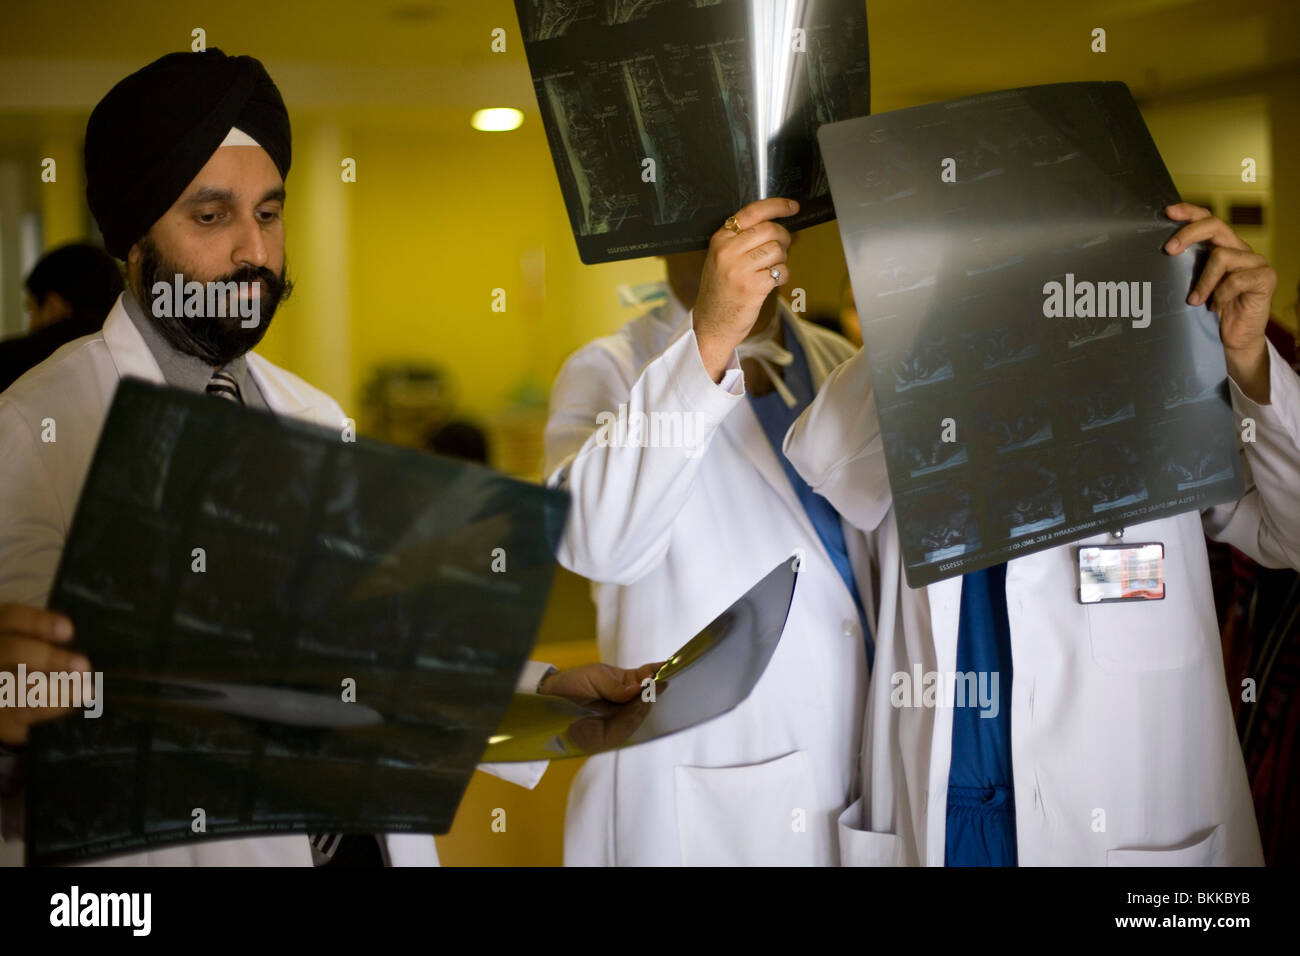 Doctors discuss a patient's x-ray at the Medicity Hospital, Gurgaon, India Stock Photo